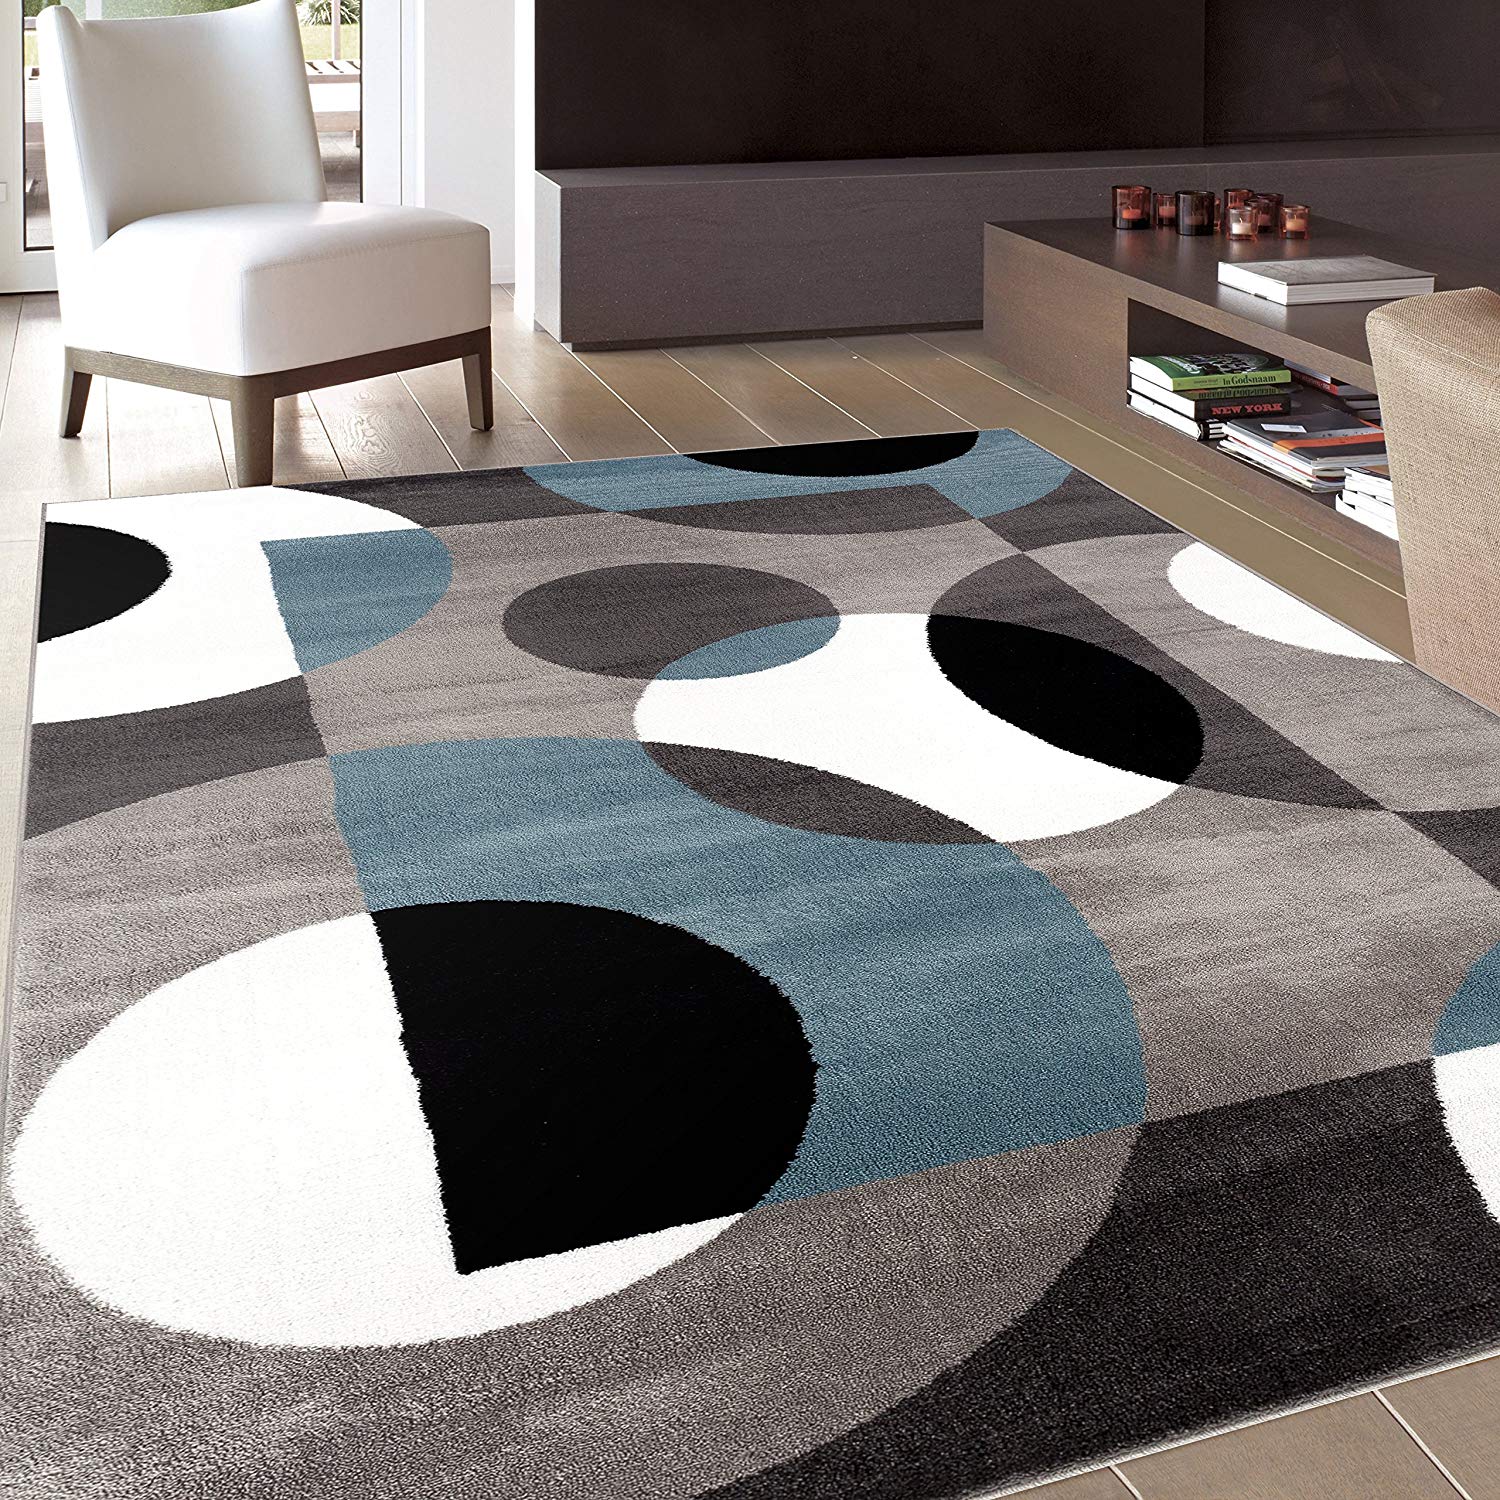 Decorate your space with modern area rugs